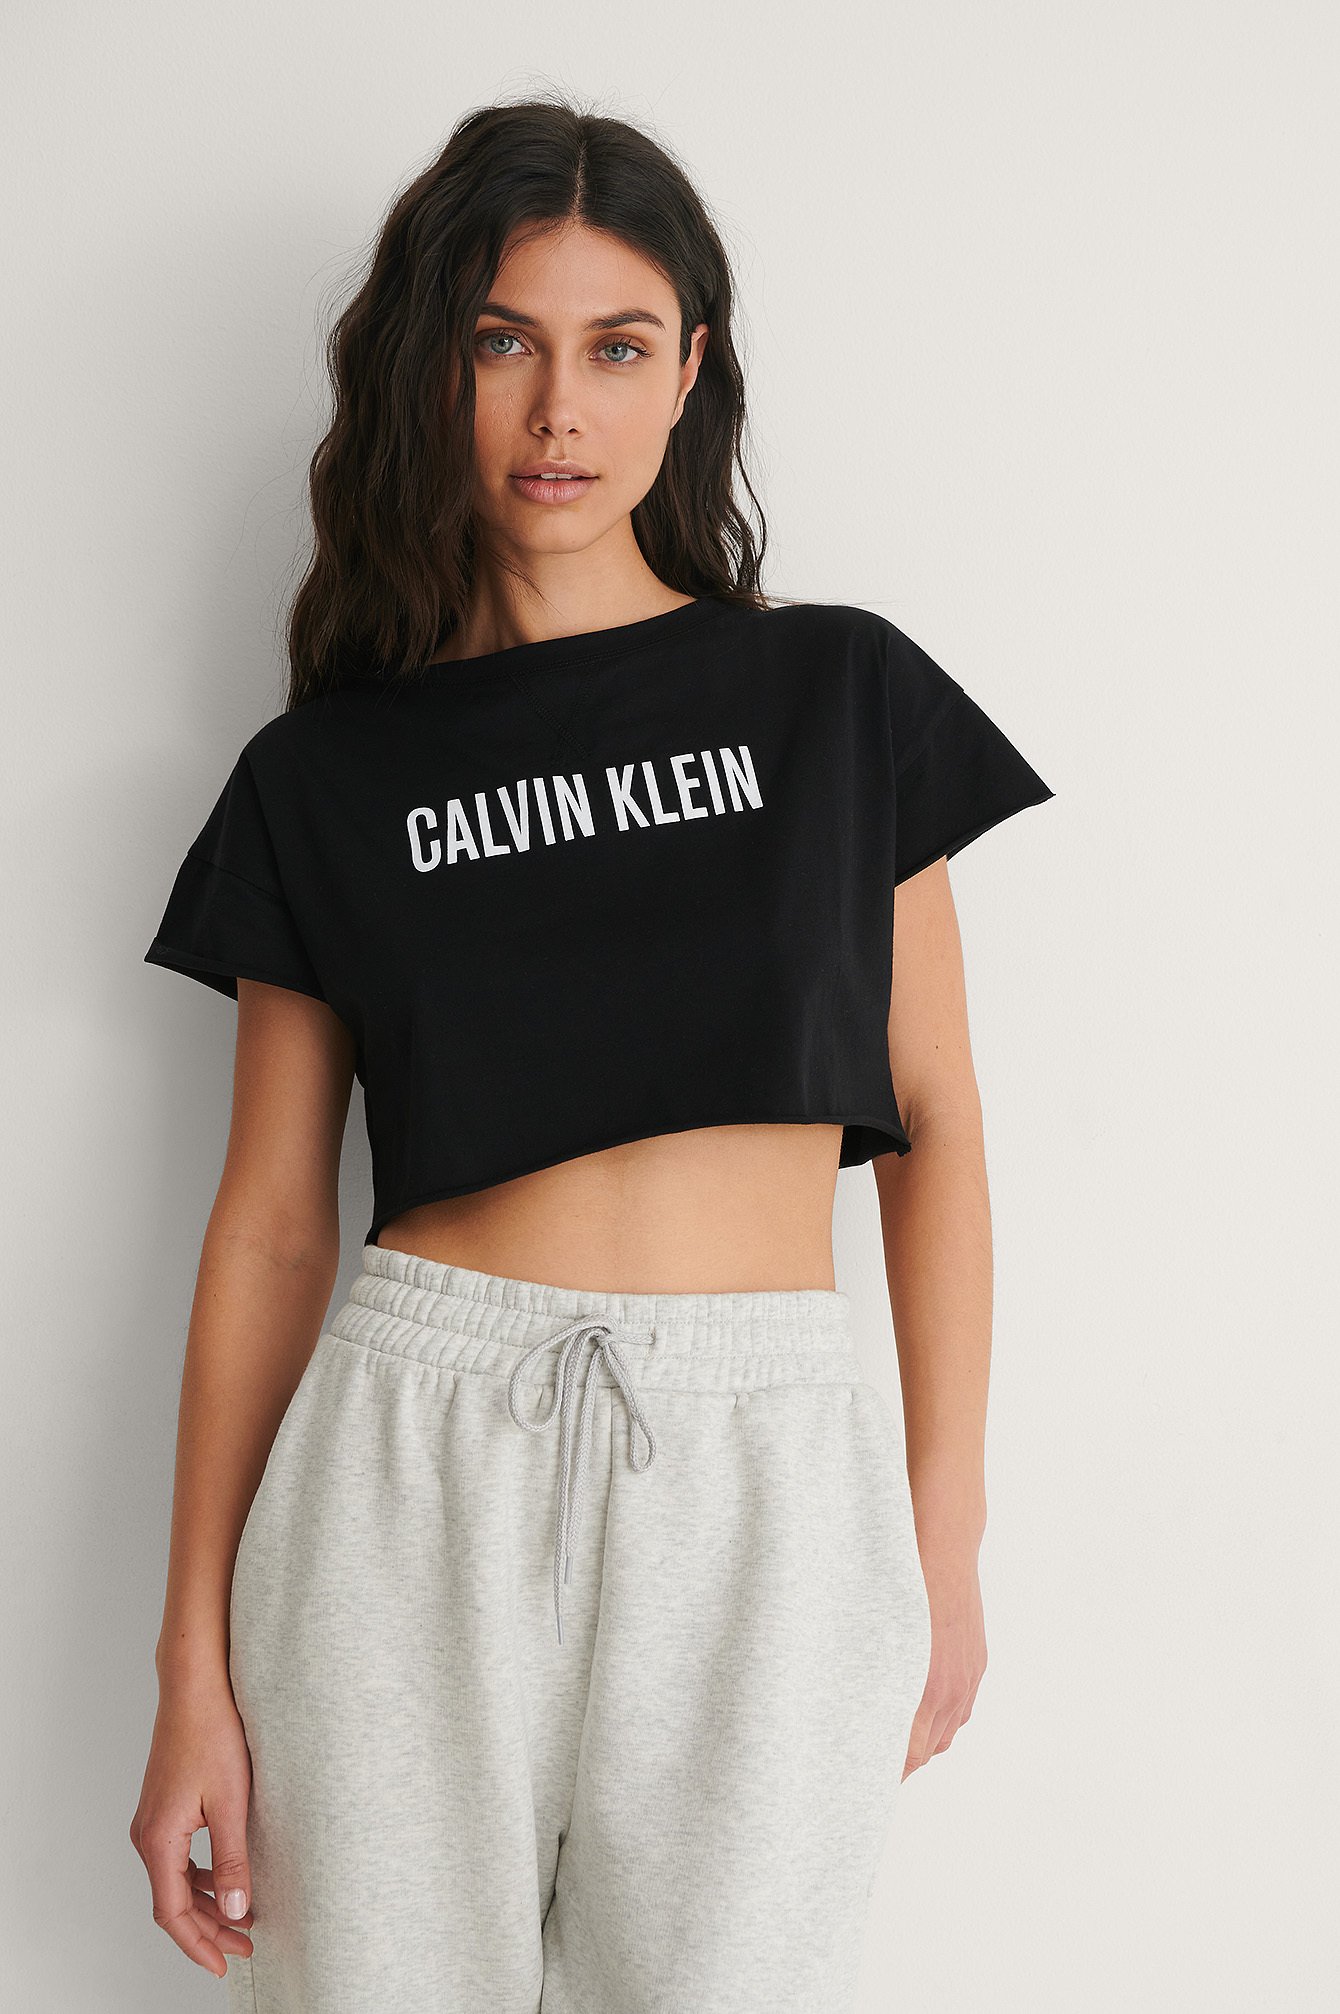 Calvin Klein Cropped Top Outfit